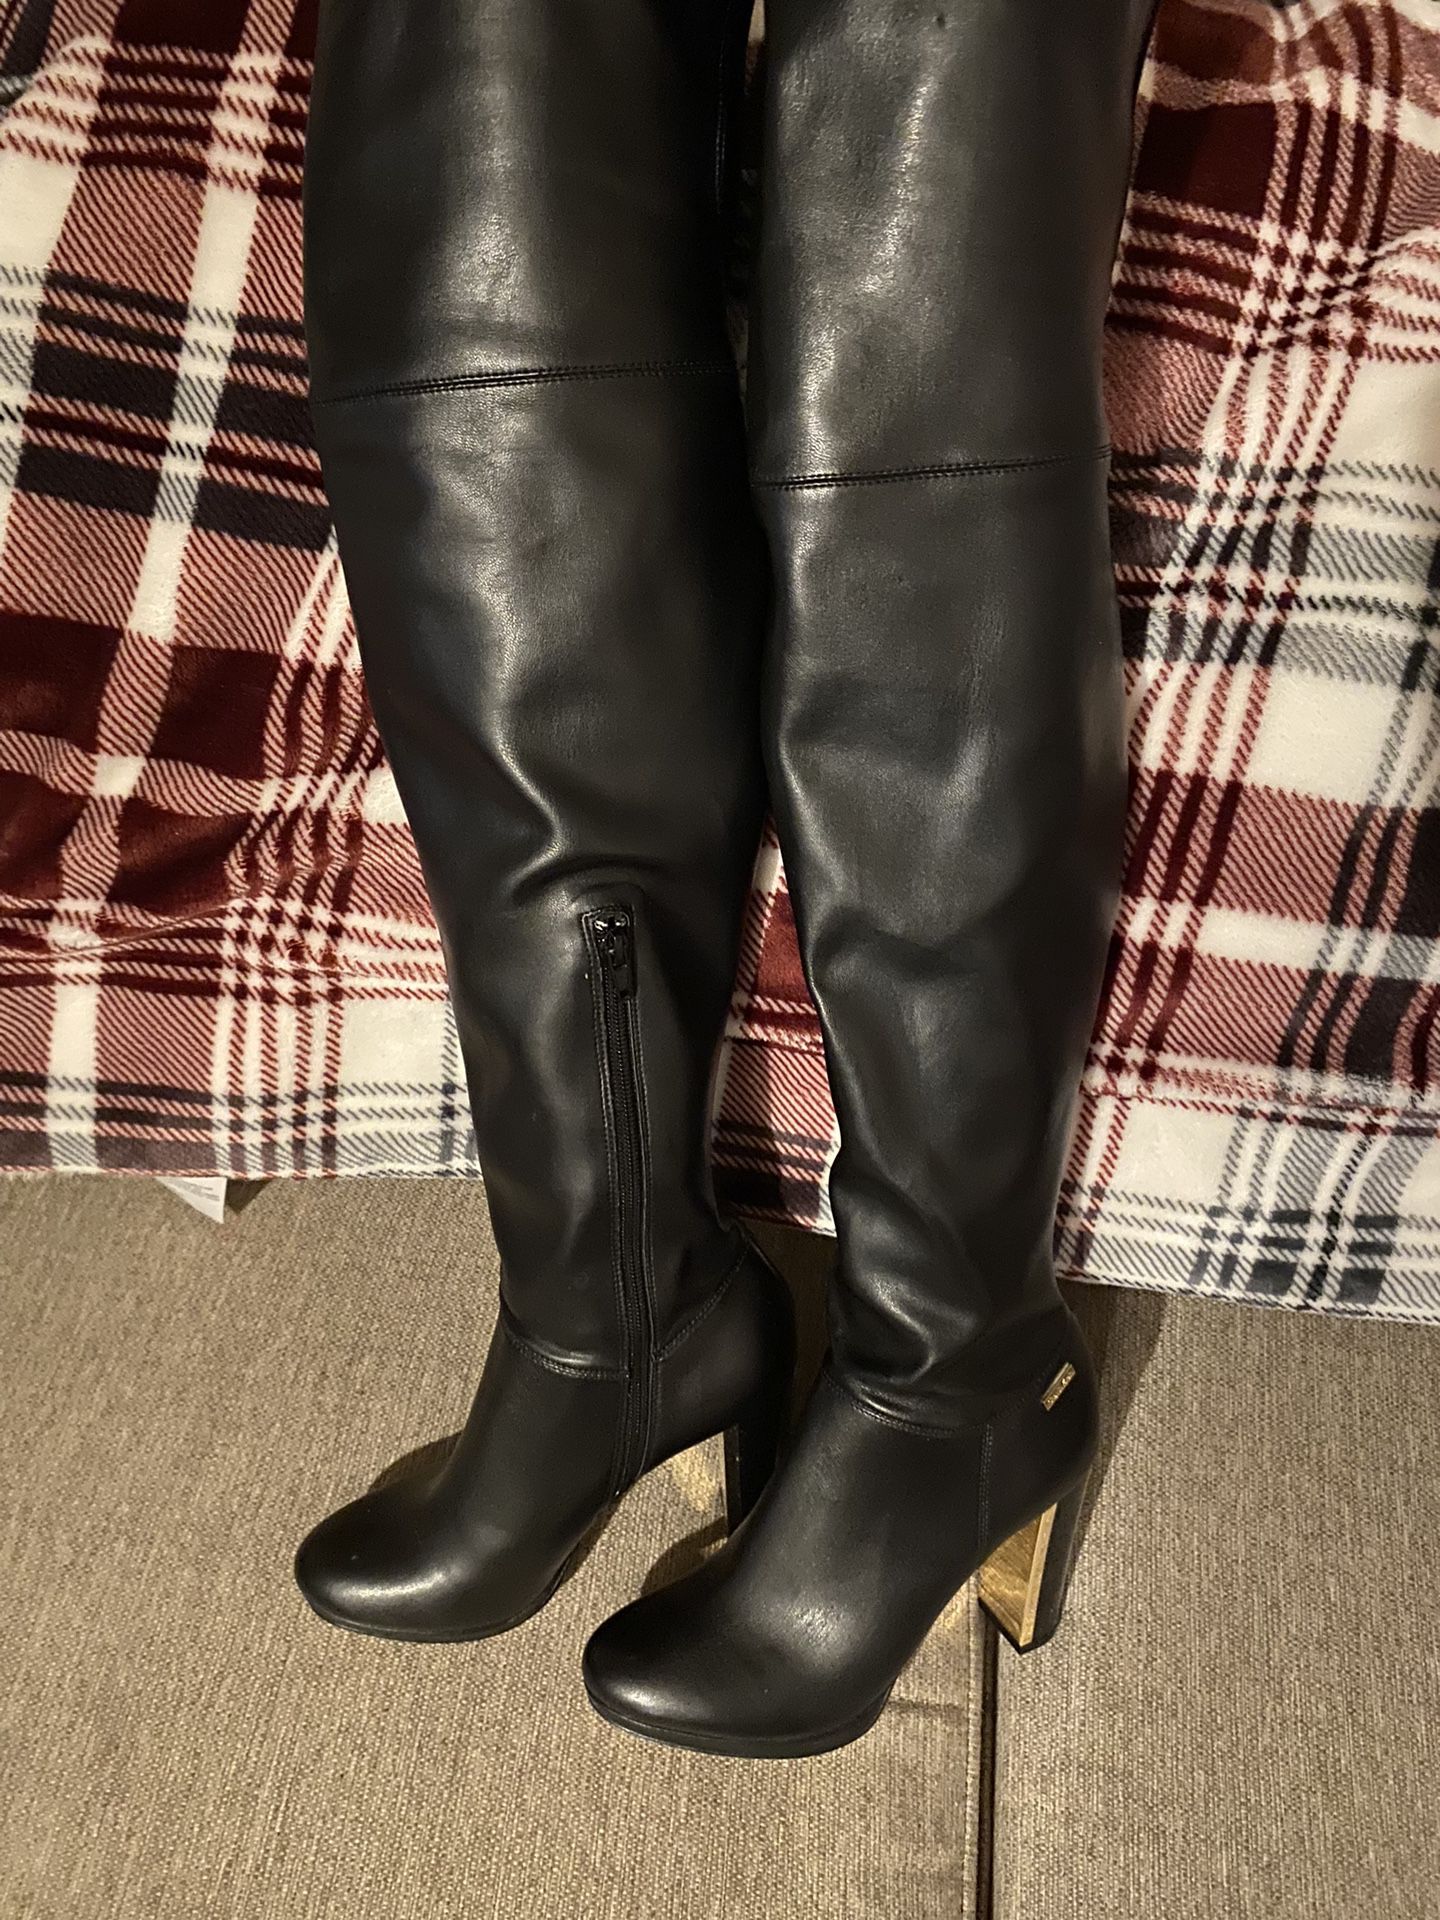 Calvin Klein Women's Black and Gold Boots